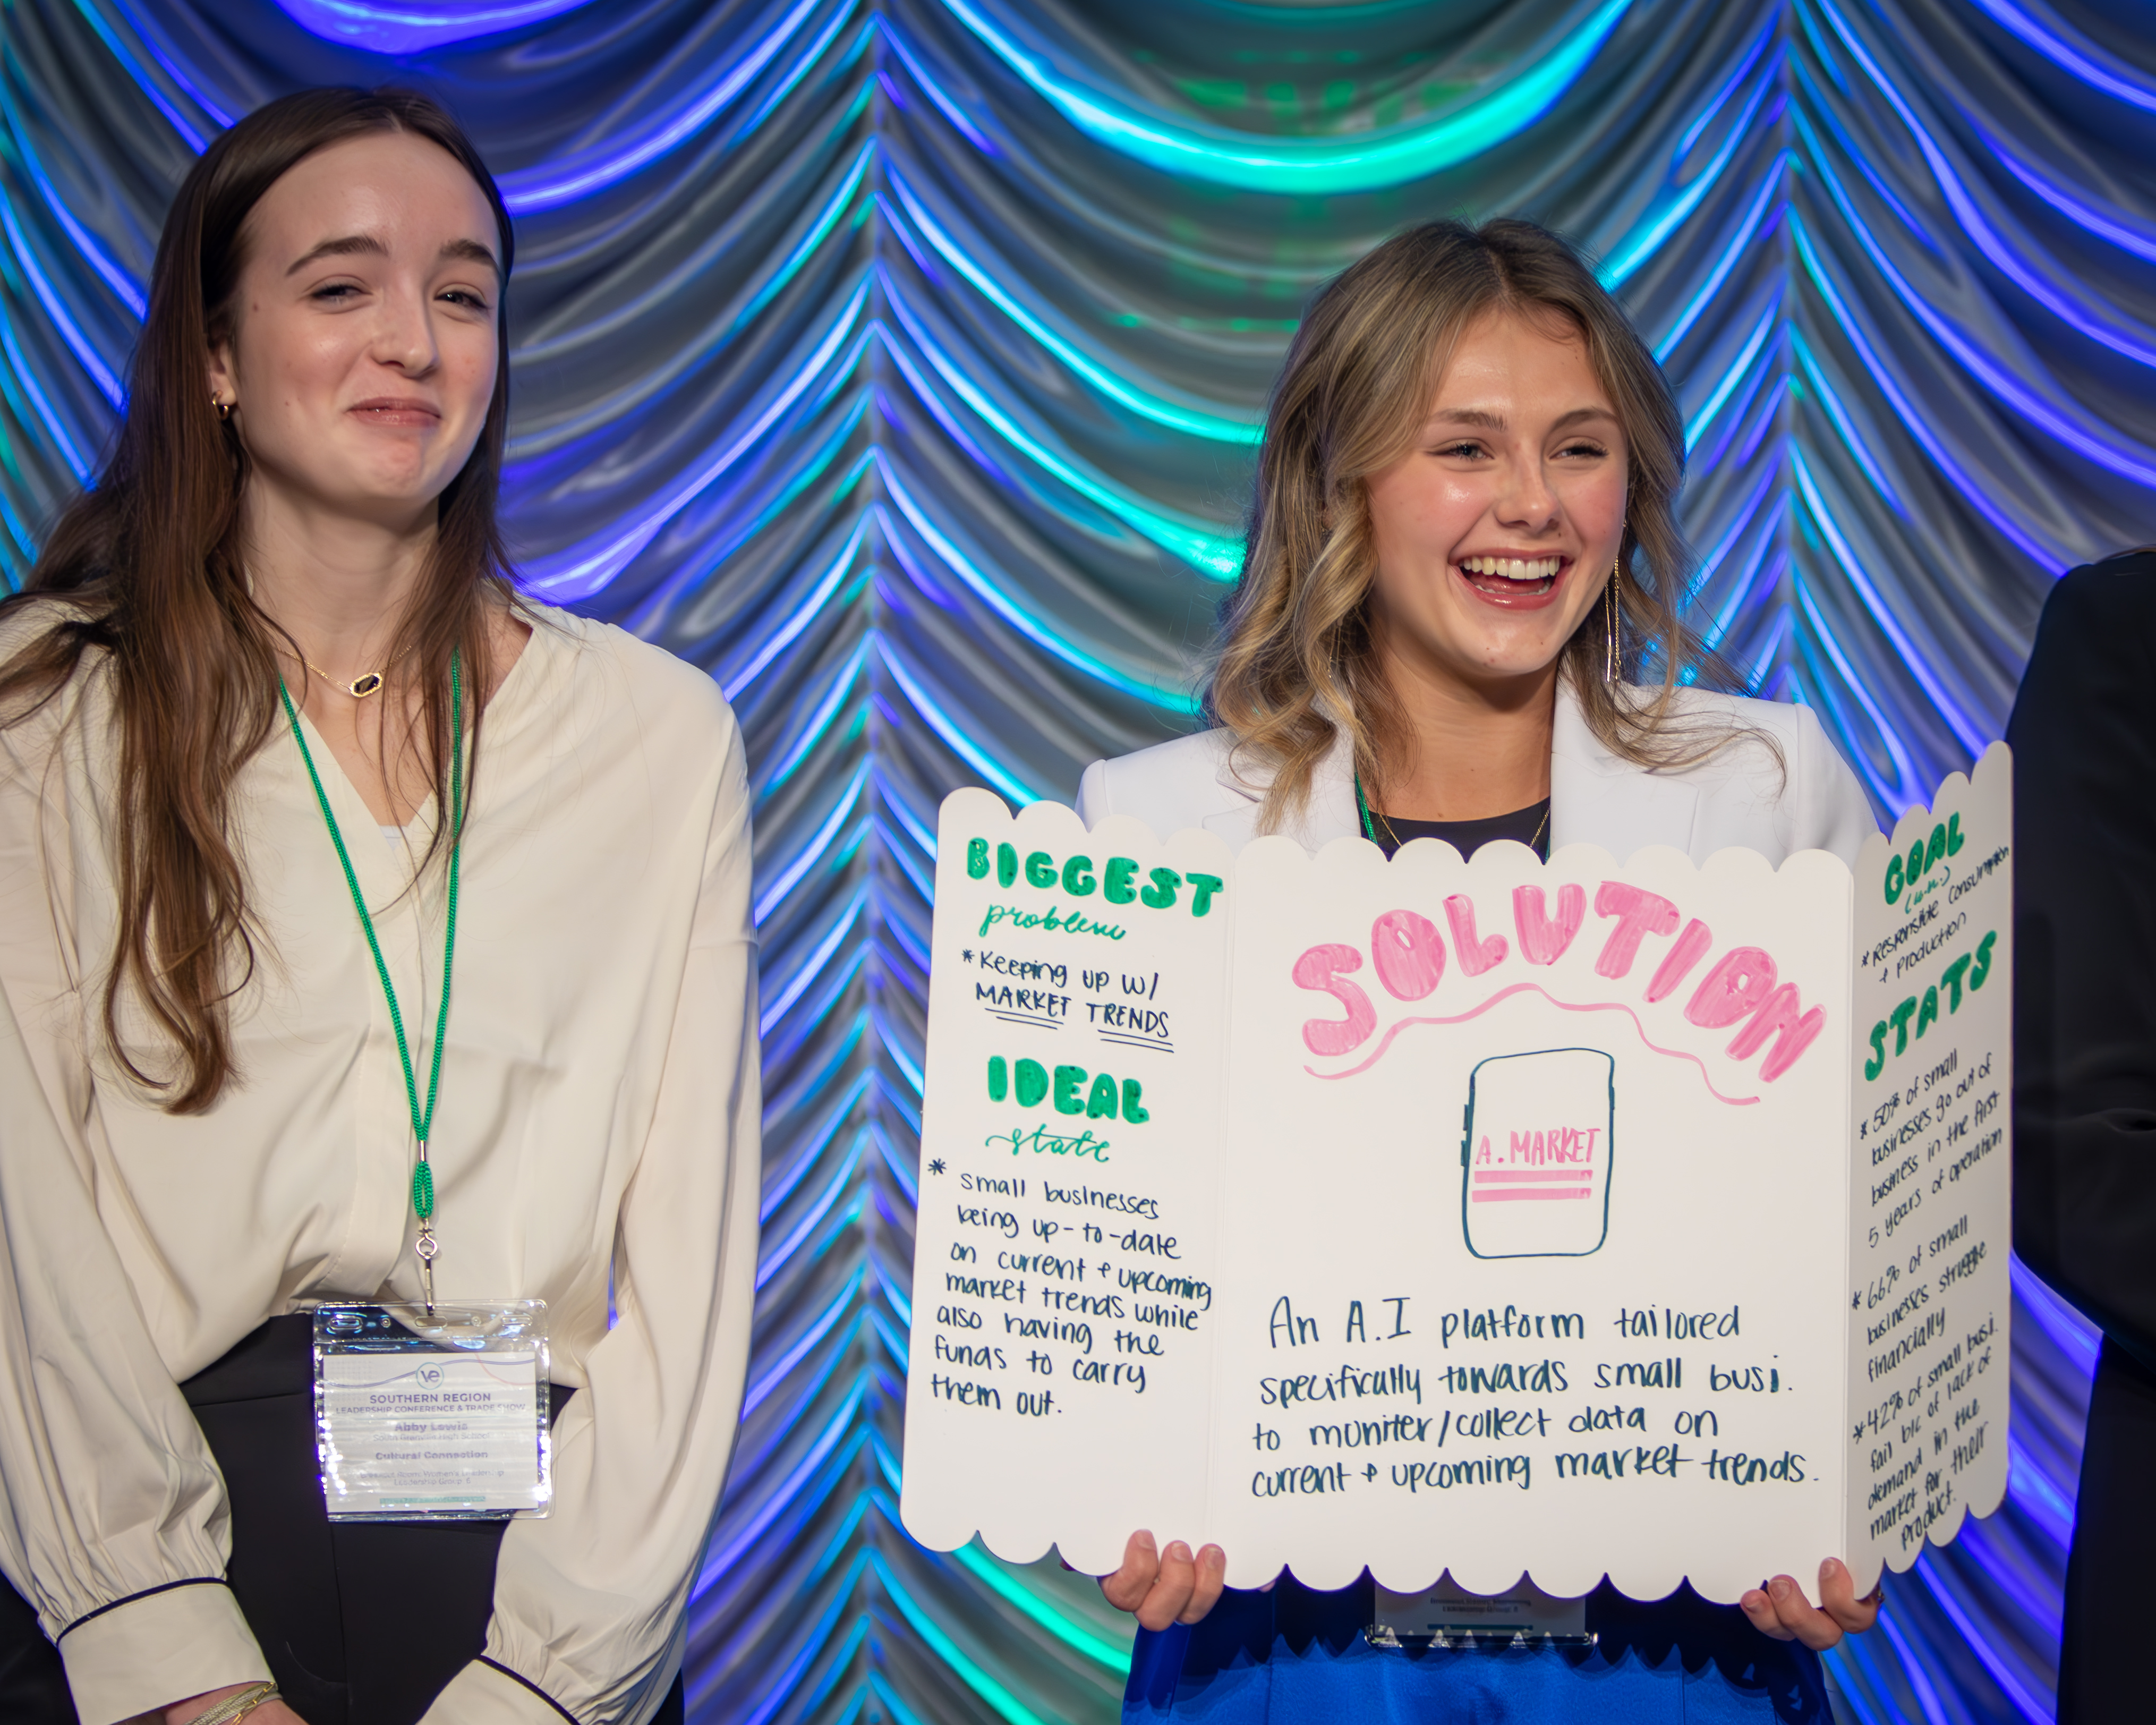 Two female students smile on stage while presenting their business plan. One holds up a poster describing their business.